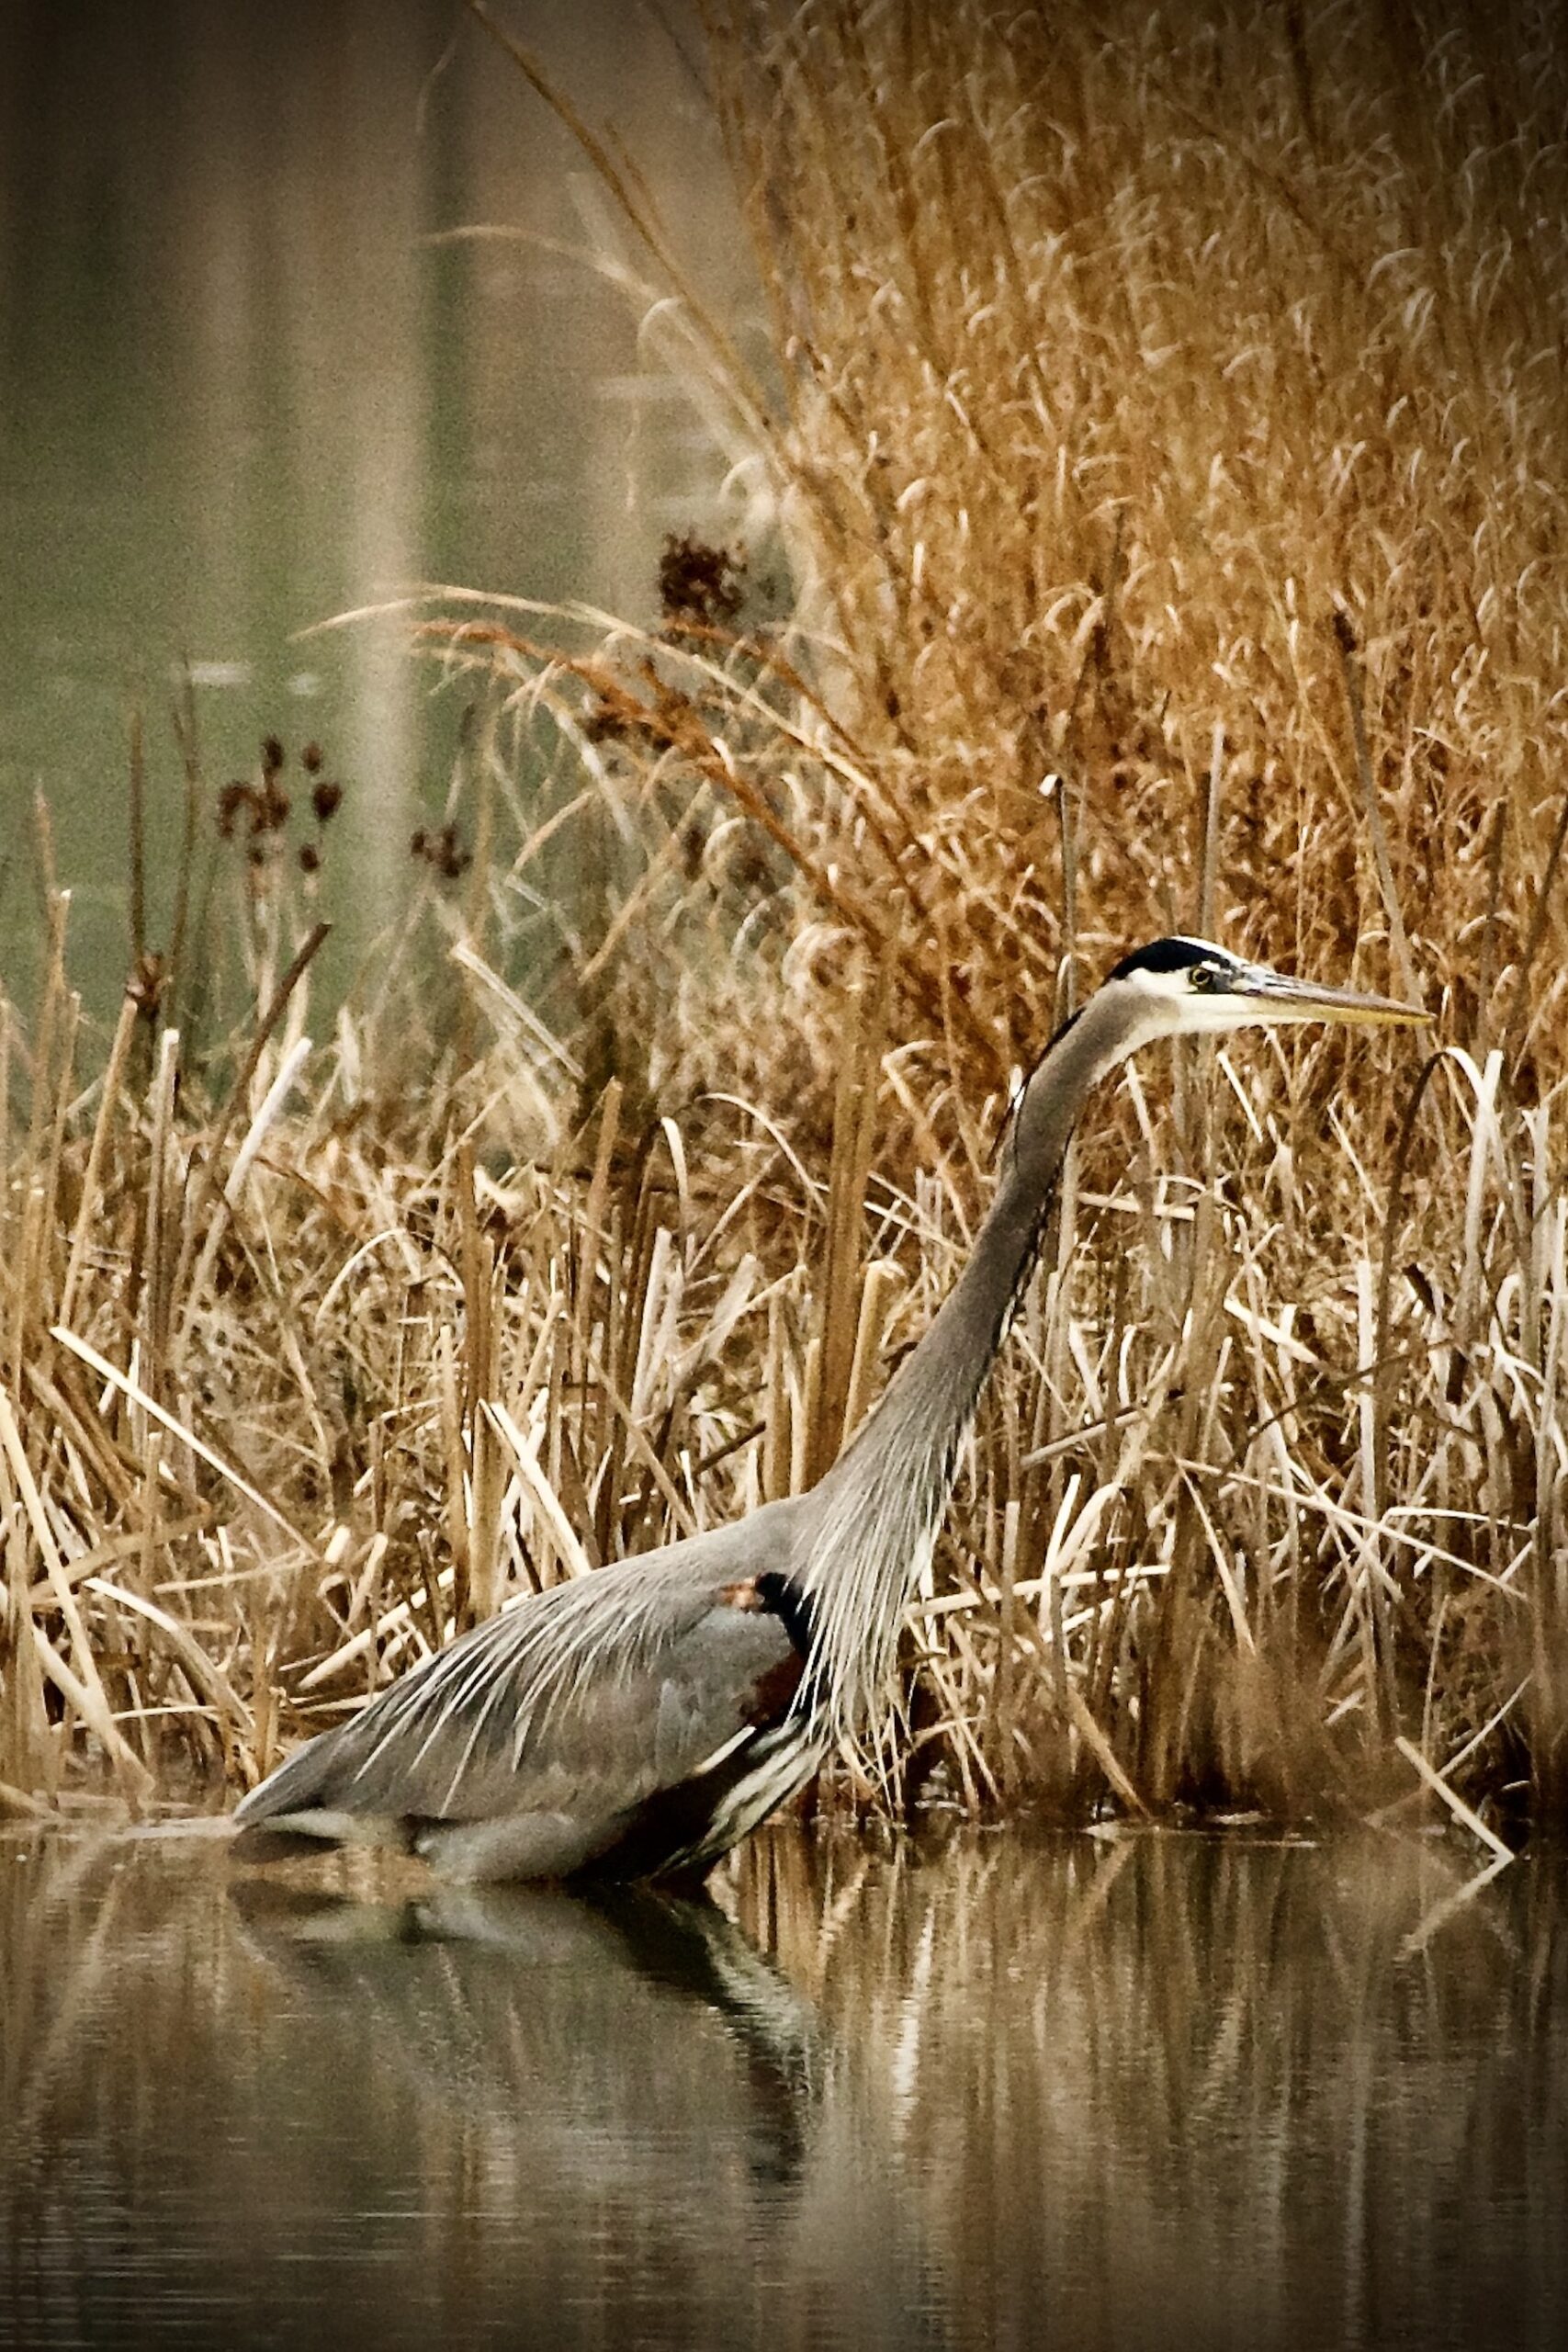 Heron in the Grass